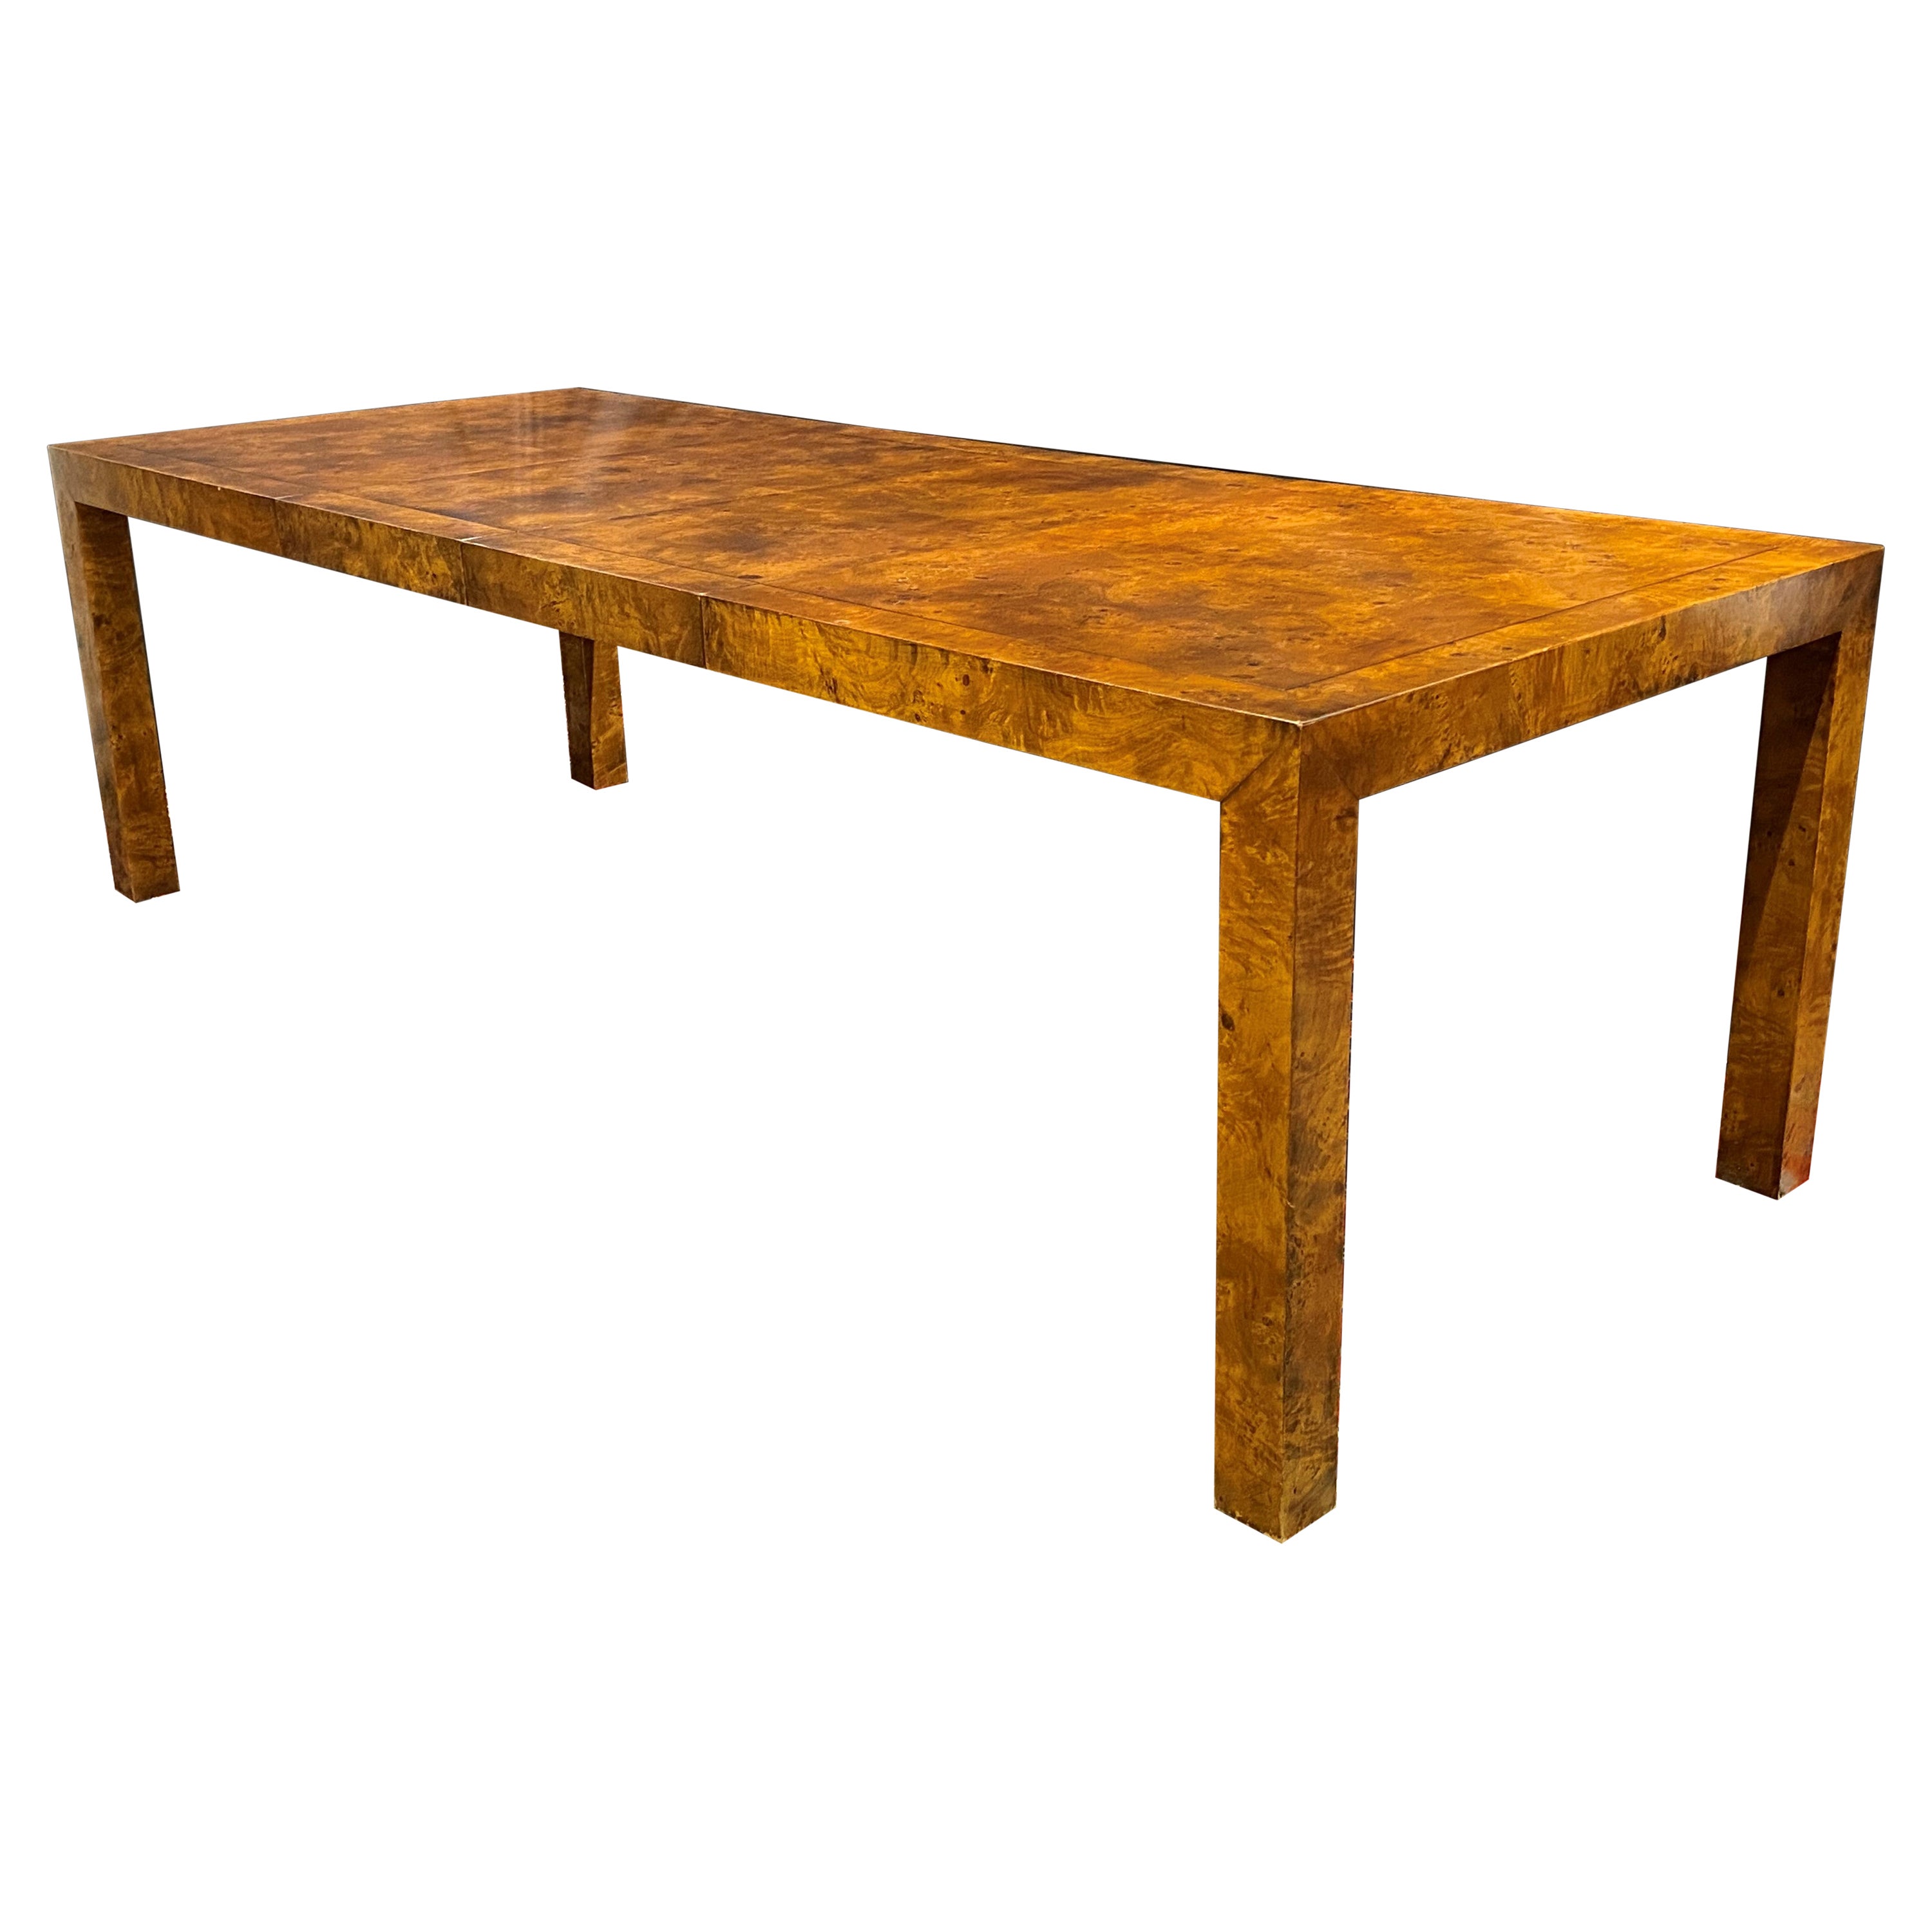 Milo Baughman Style Burlwood Parsons Dining Table with Two Leaves